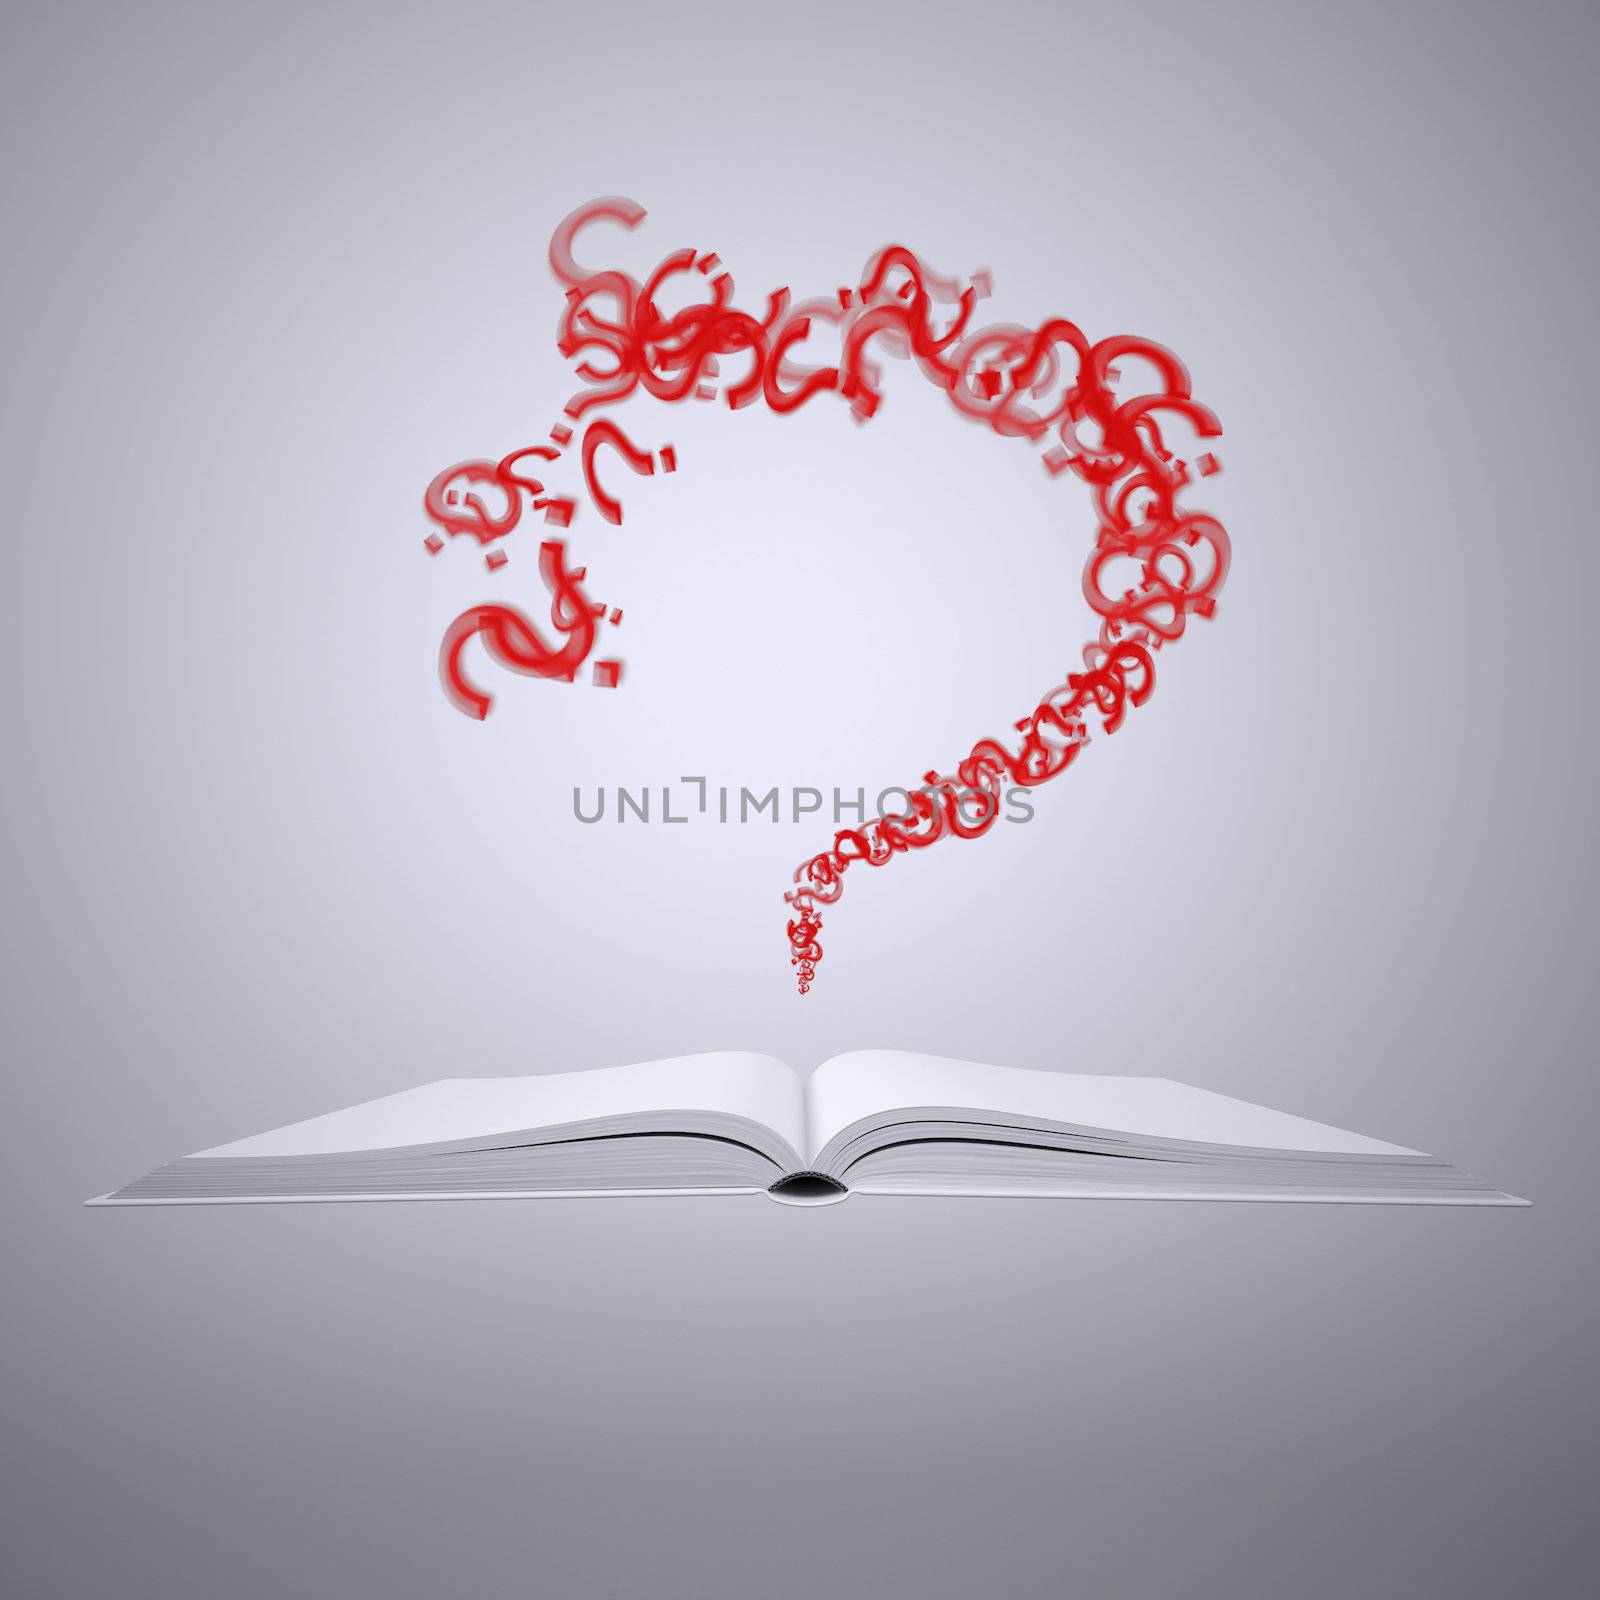 An open book and a question mark by cherezoff